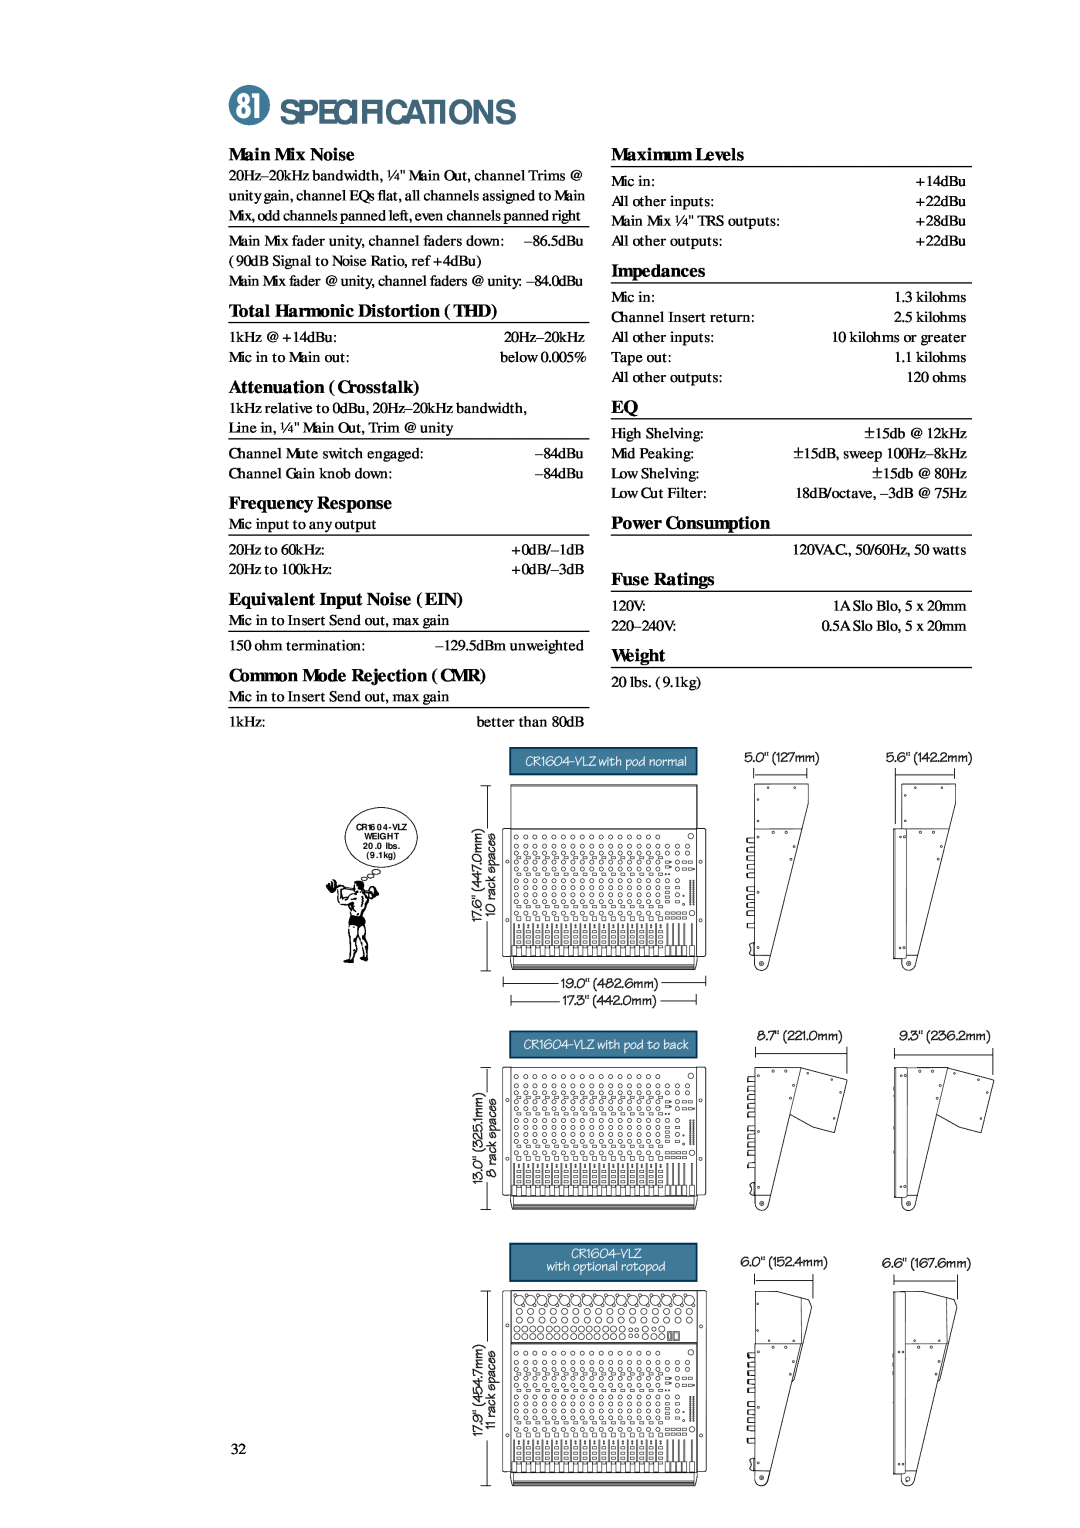 Mackie CR1604 - VLZ owner manual Specifications 